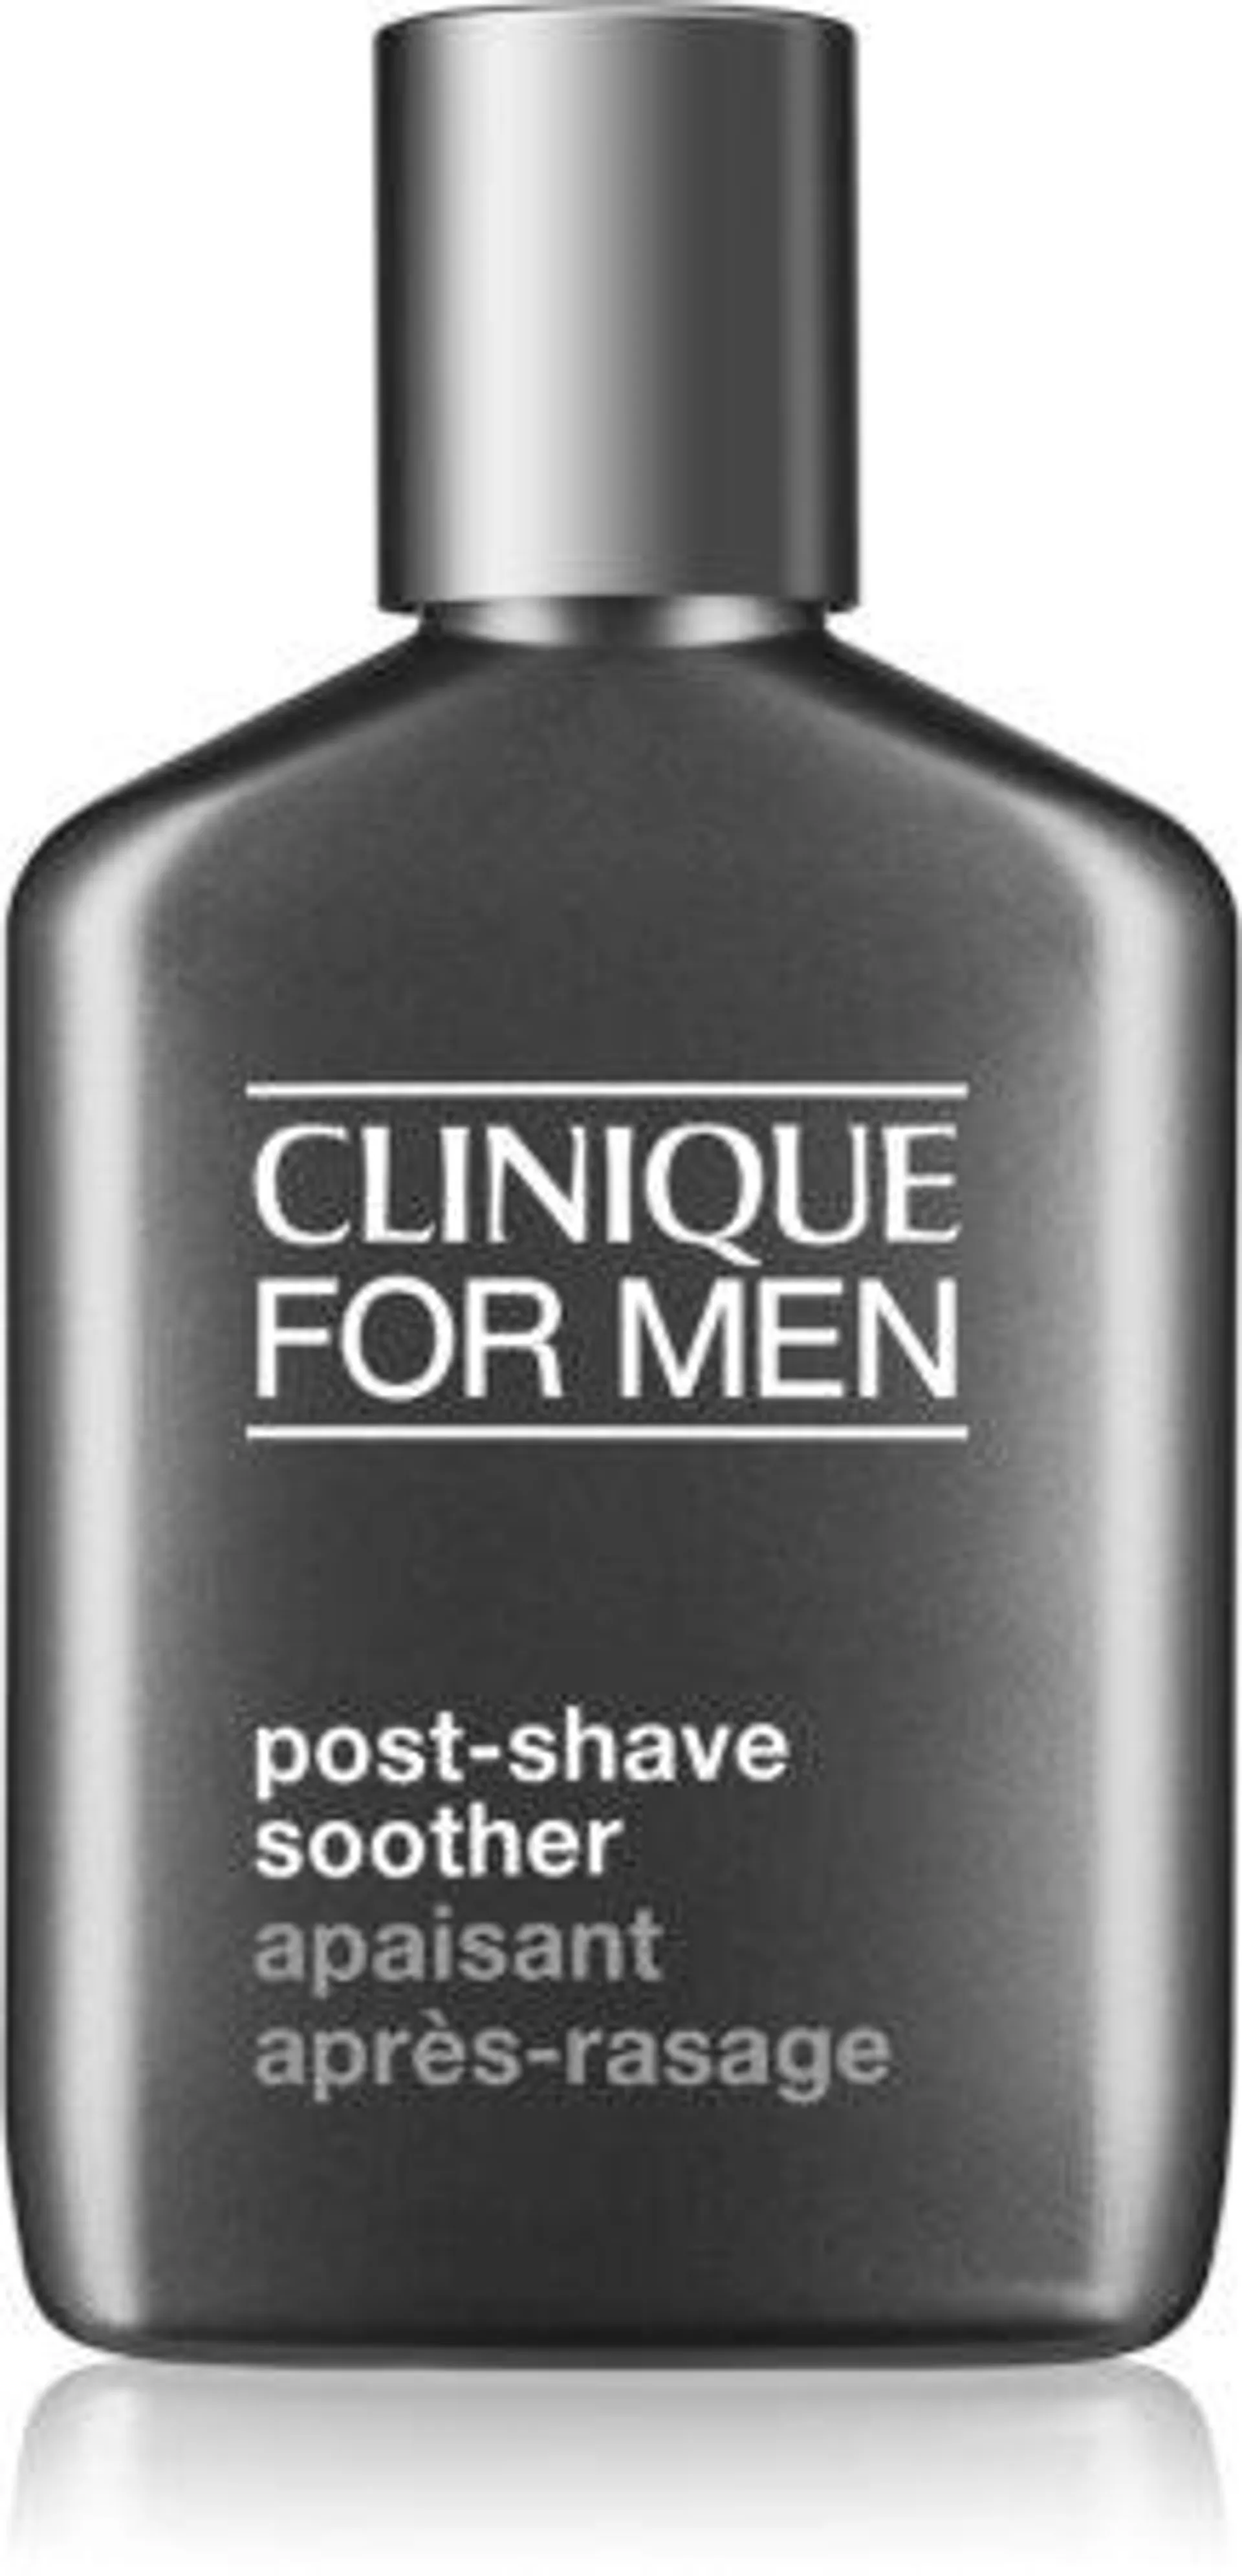 For Men™ Post-Shave Soother